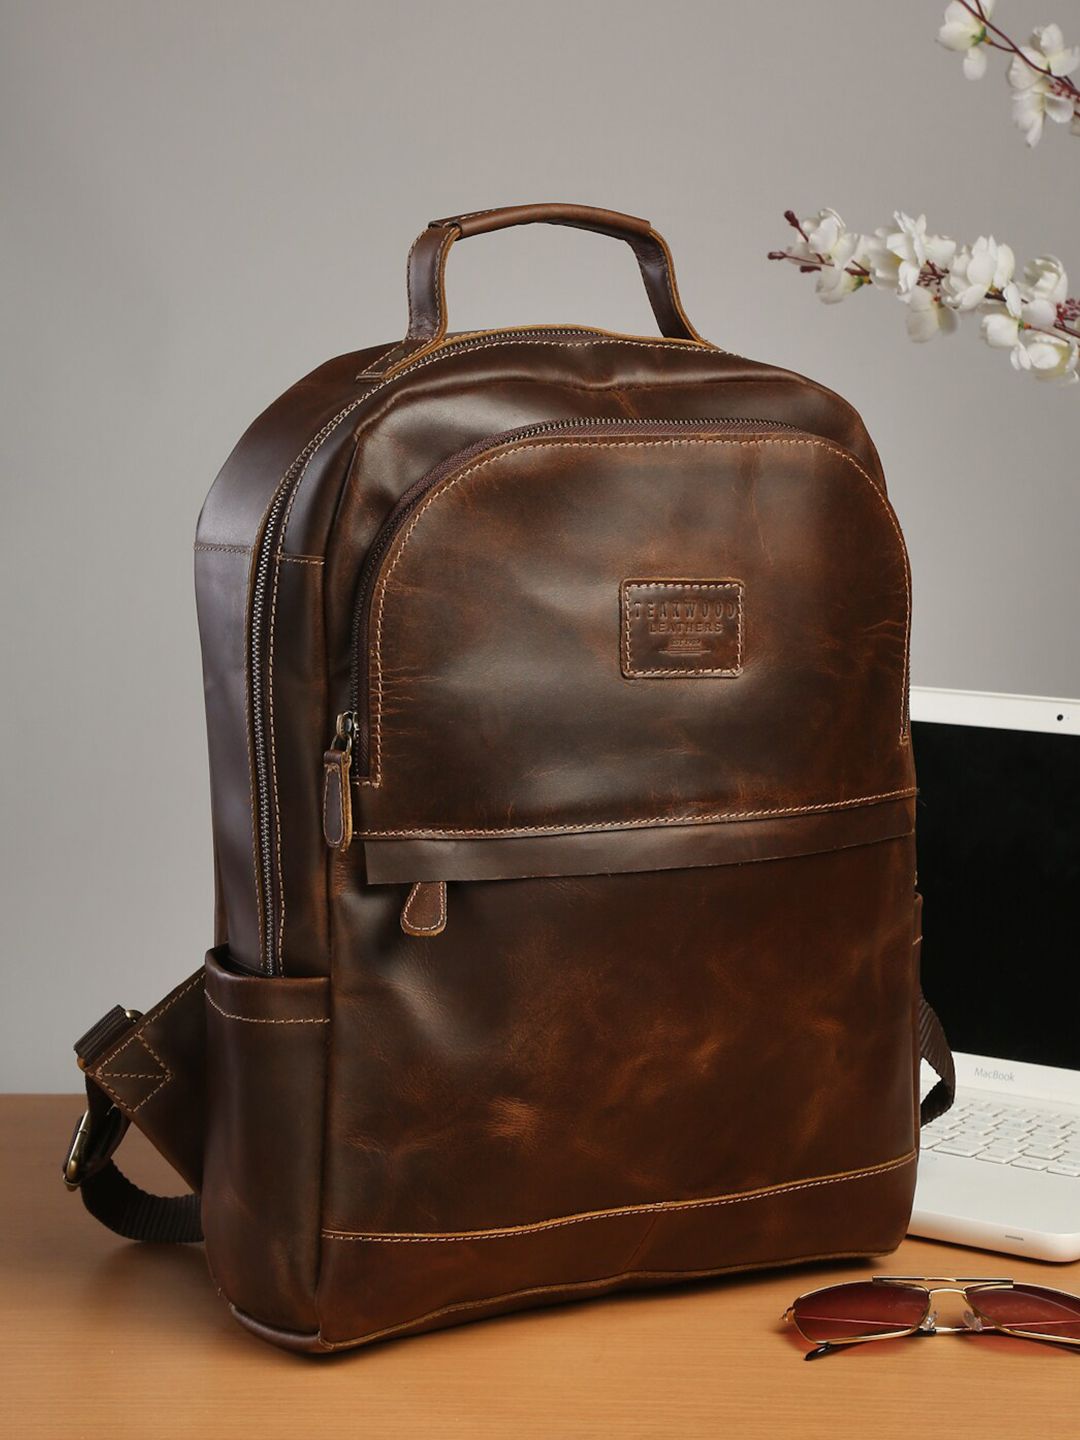 Teakwood Leathers Brown Leather Backpack Price in India